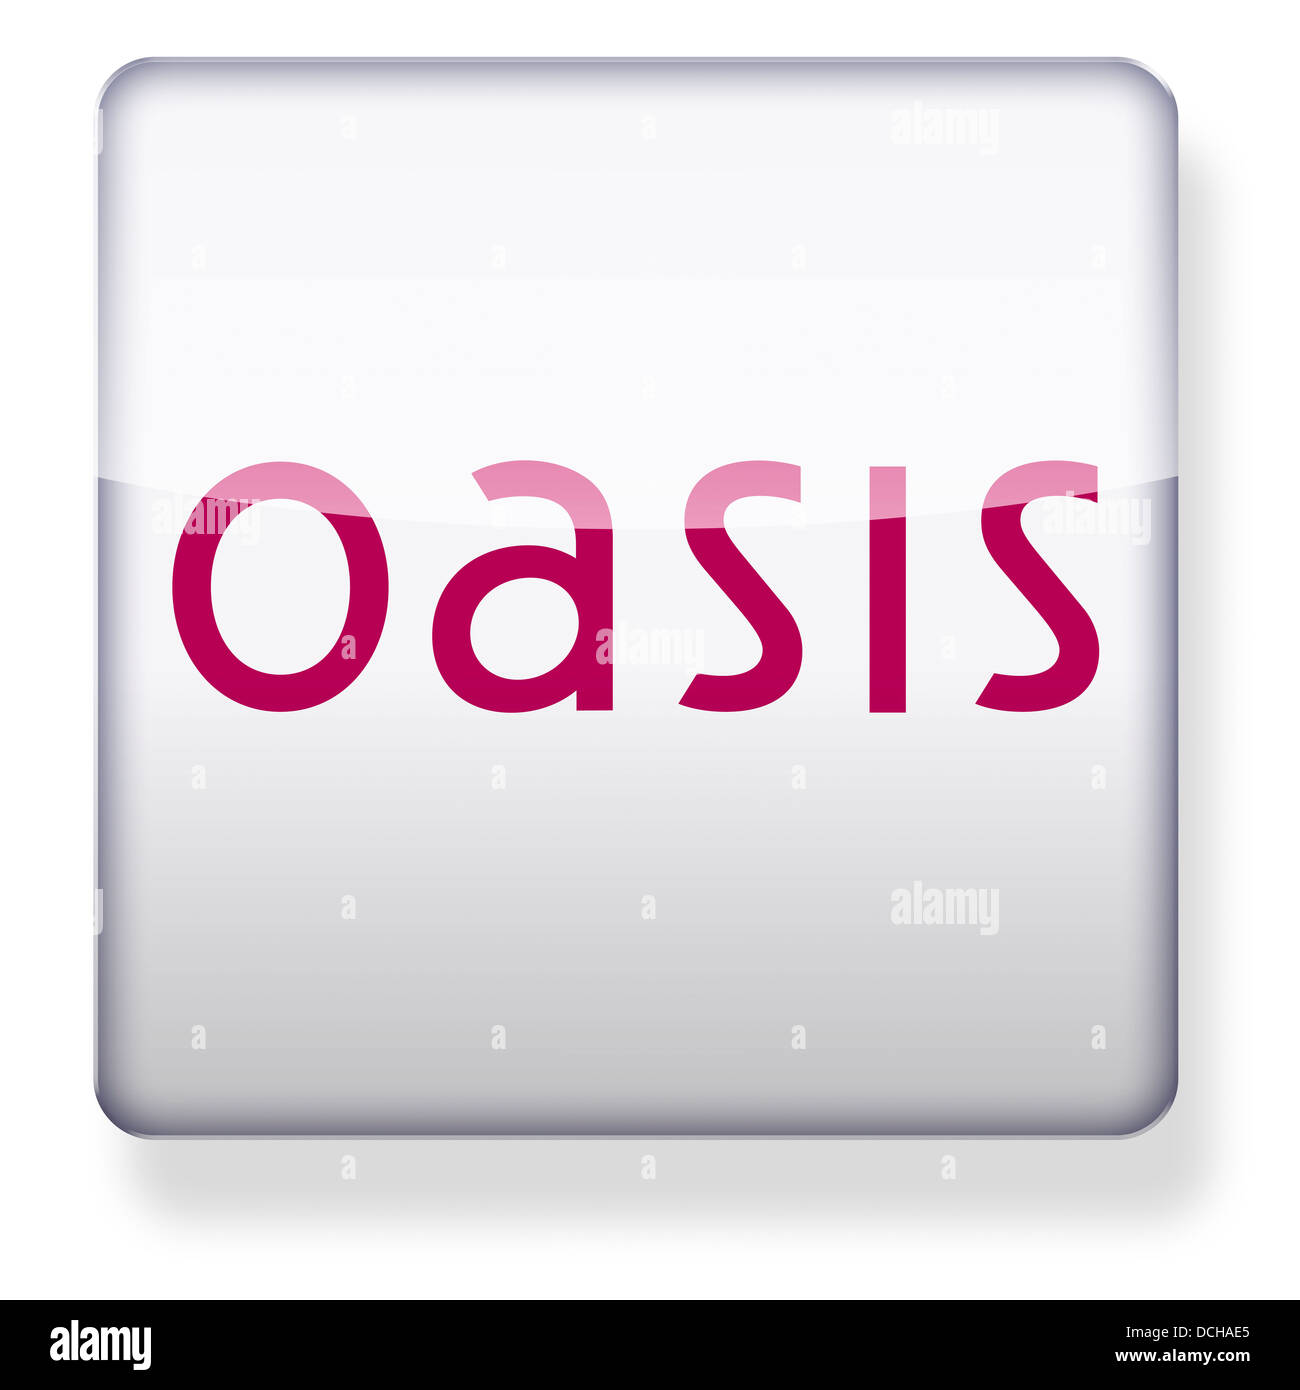 Oasis clothes store logo as an app icon. Clipping path included Stock Photo  - Alamy